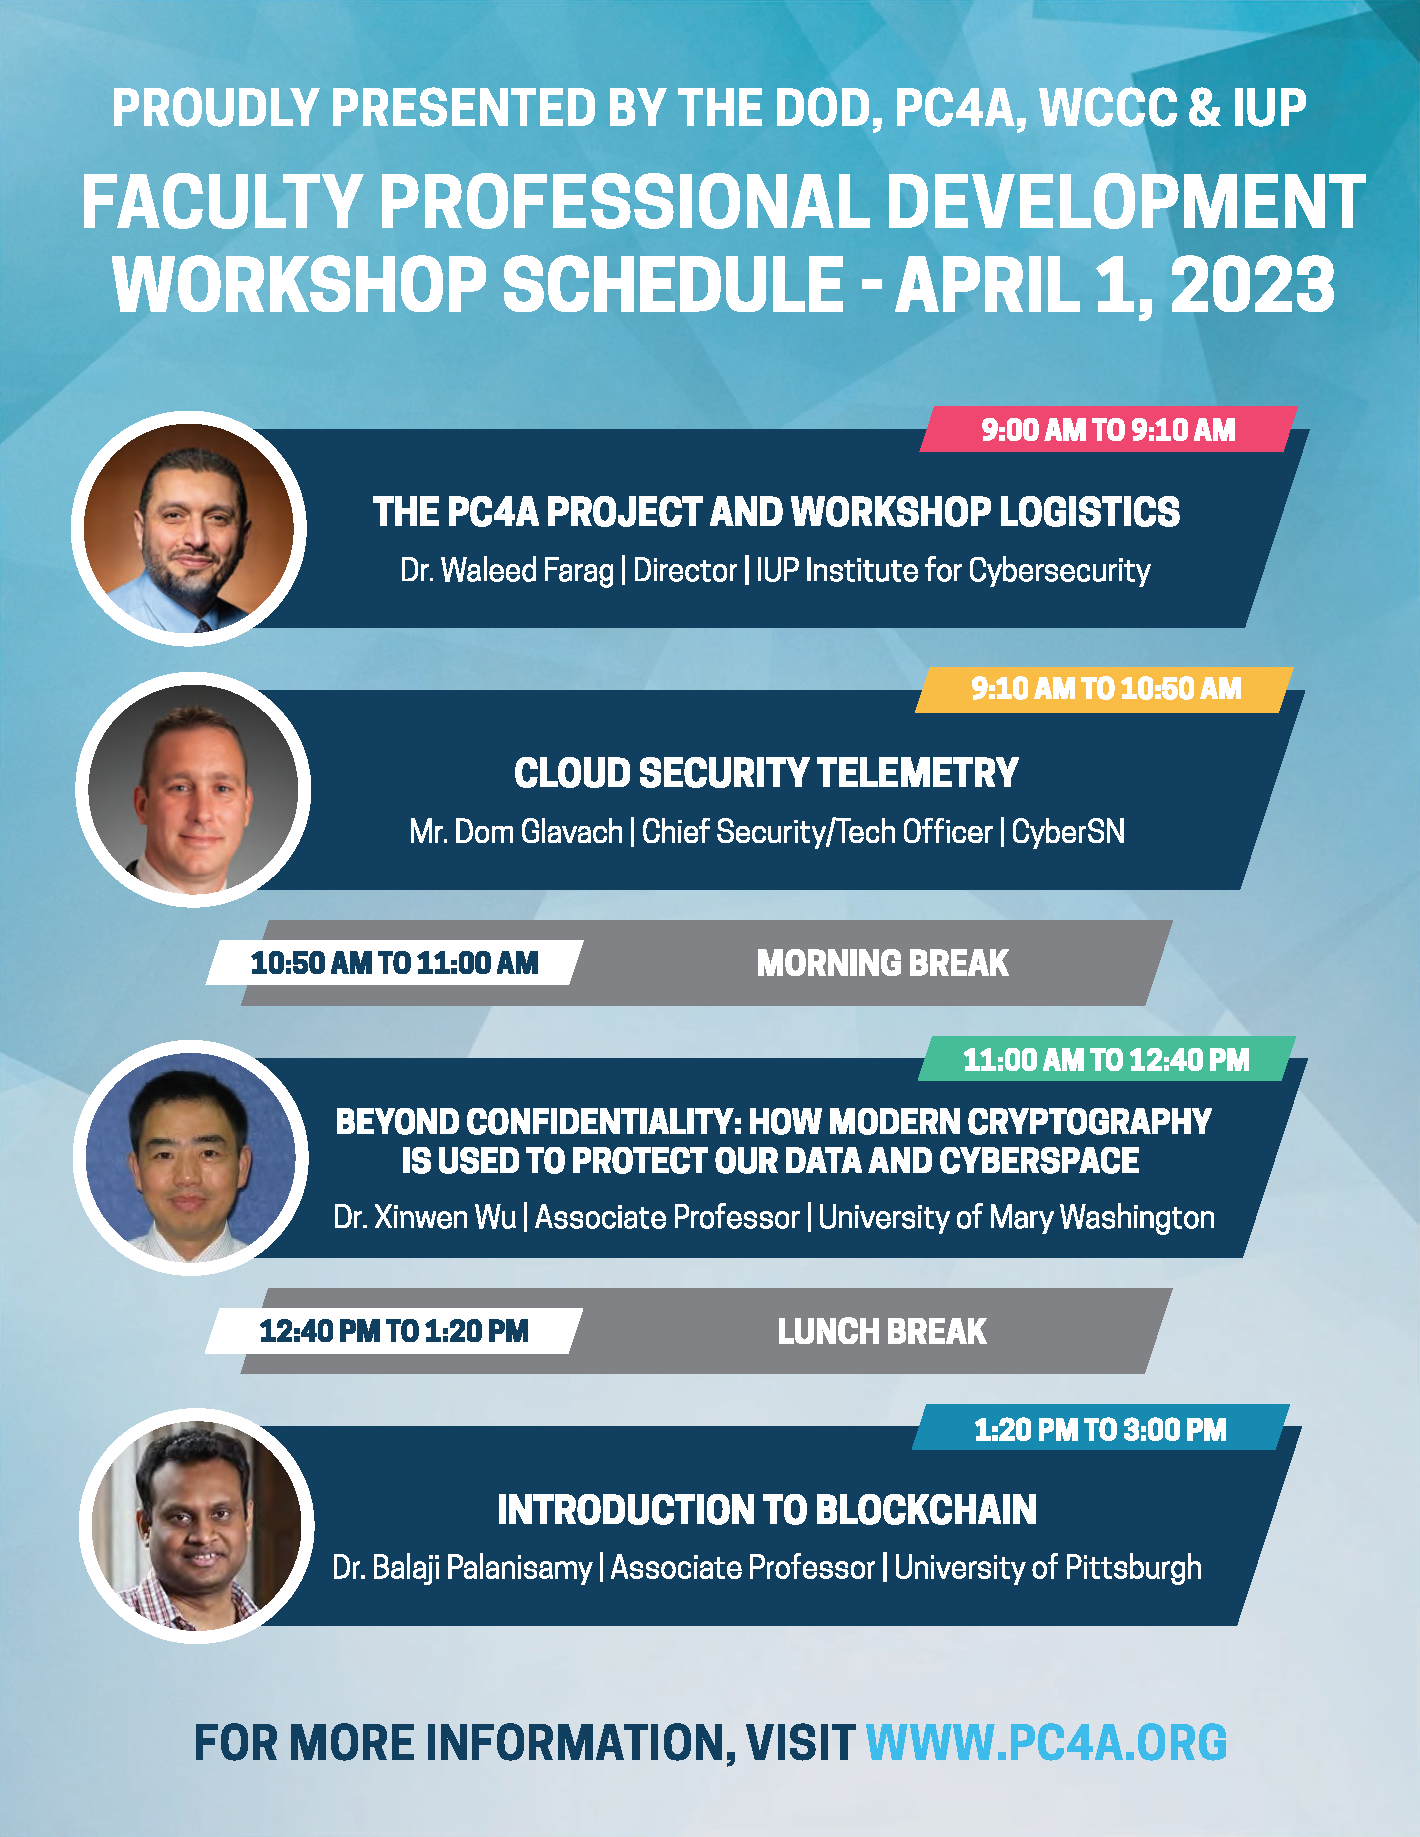 Schedule for the WCCC FDP Workshop